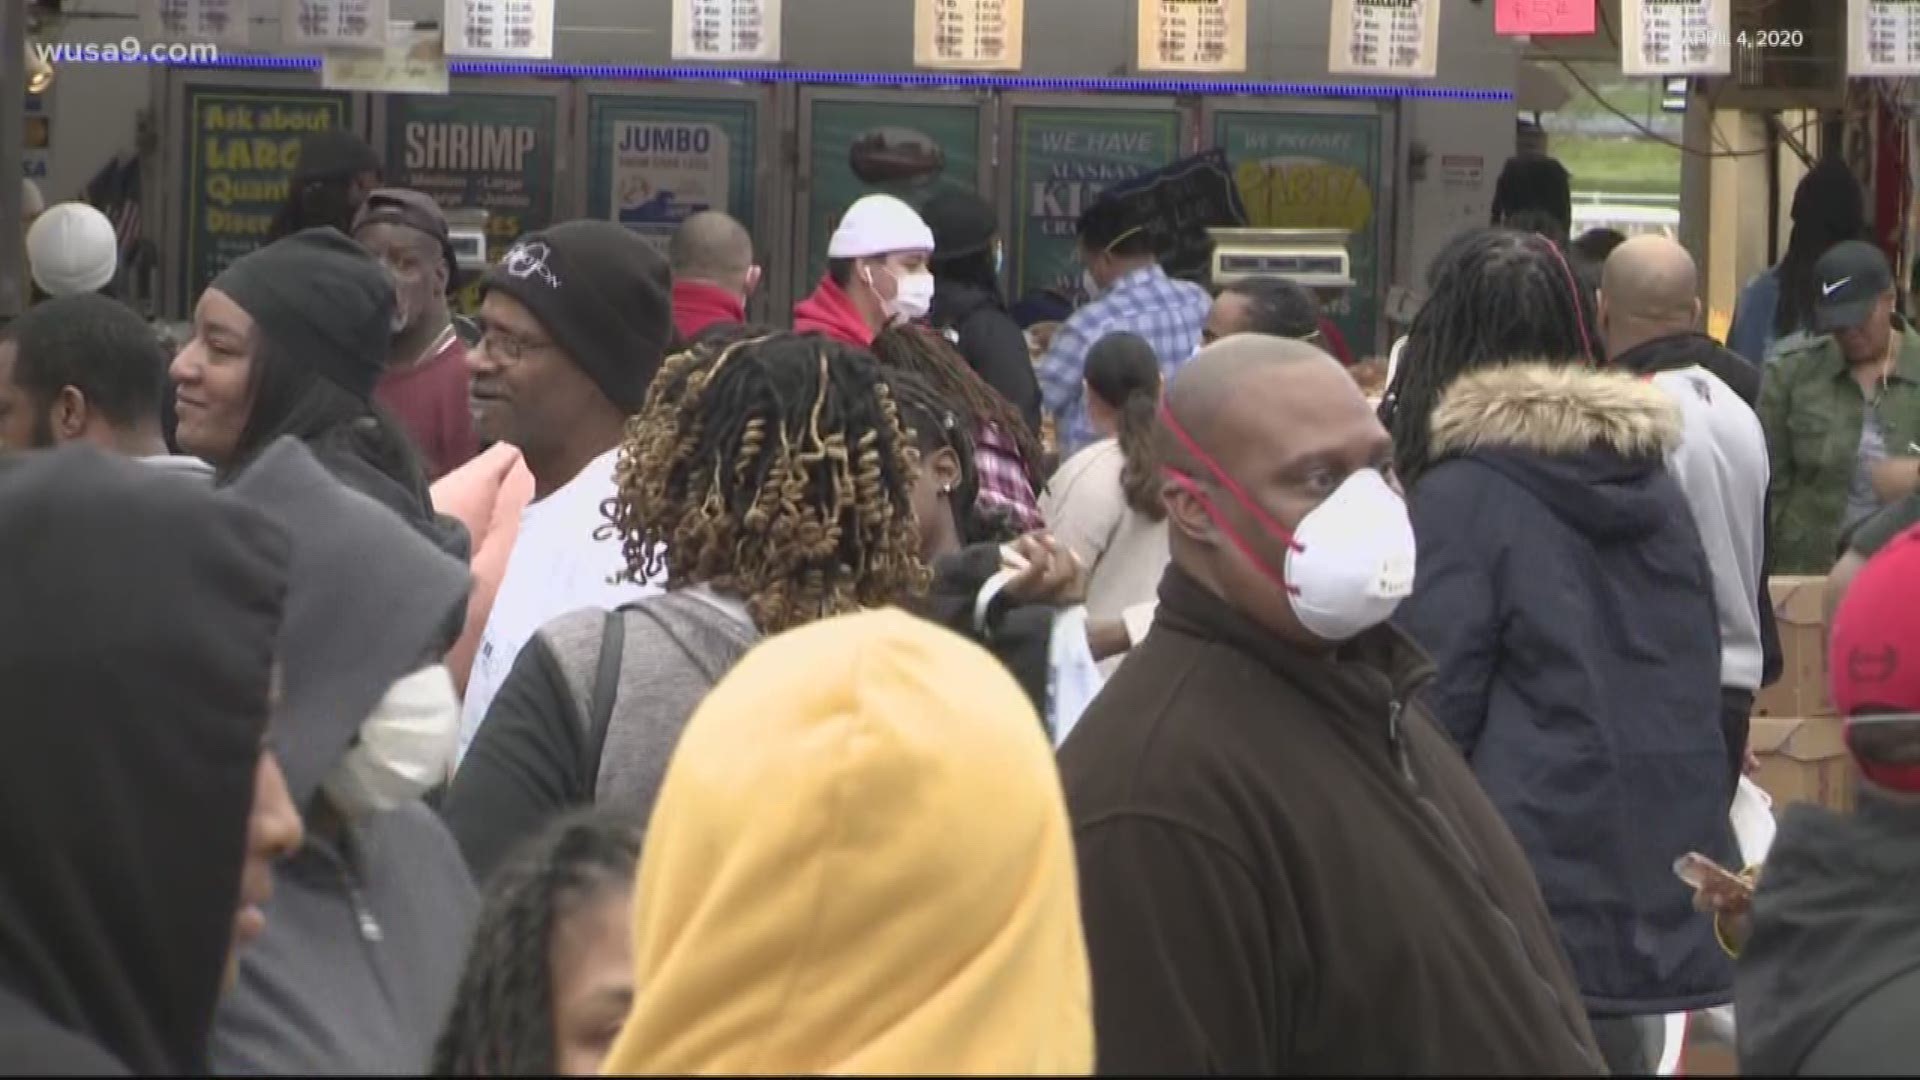 It is safe to say there was a collective gasp when many saw the video of crowds gathered at DC’s fish market Saturday in the Wharf neighborhood.